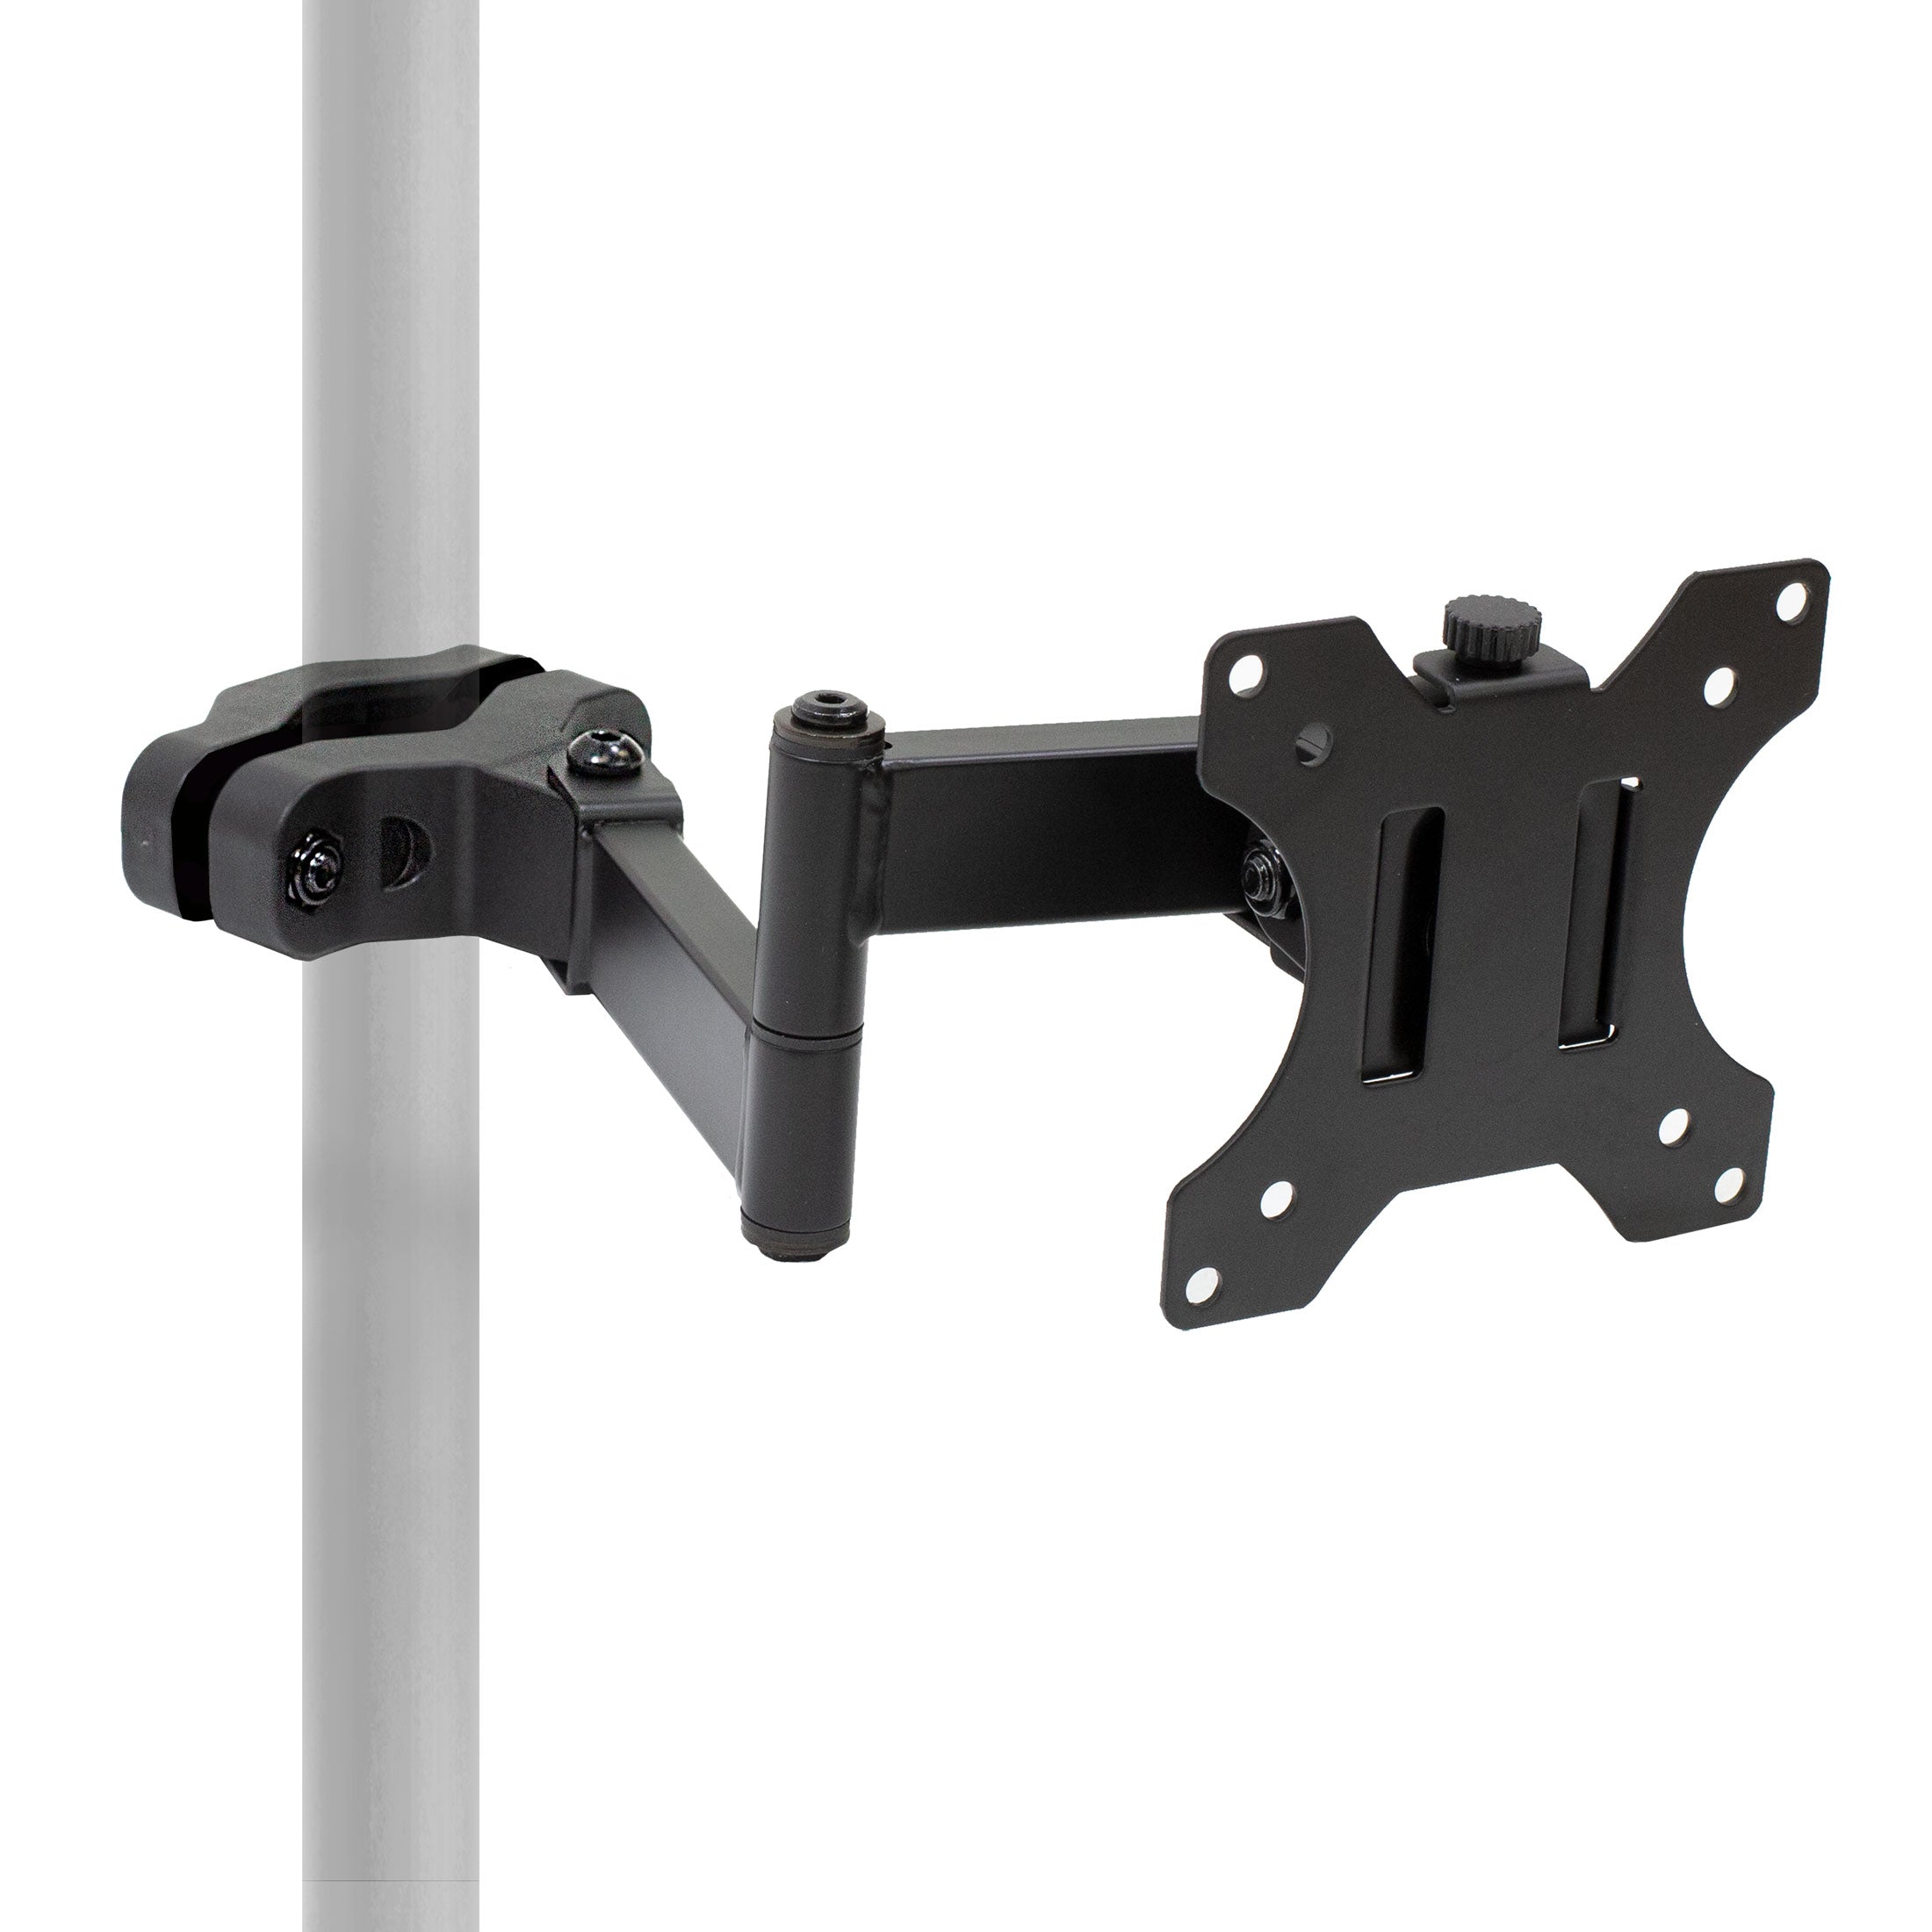 Full-Motion Monitor Truss/Pole Clamp Mount